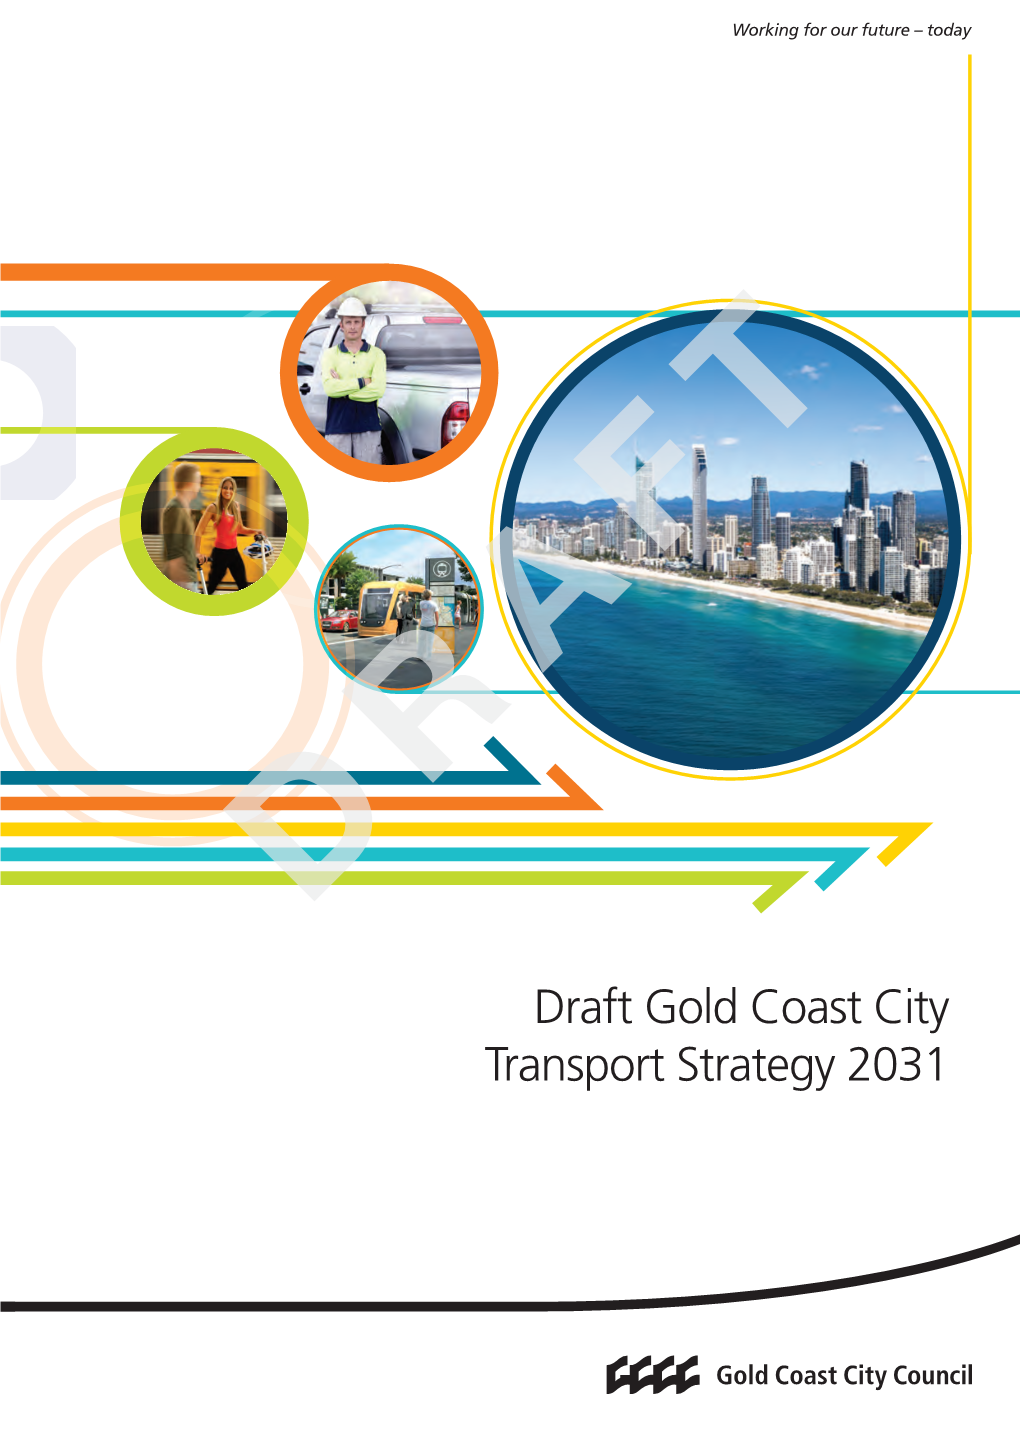 Draft Gold Coast City Transport Strategy 2031 Foreword